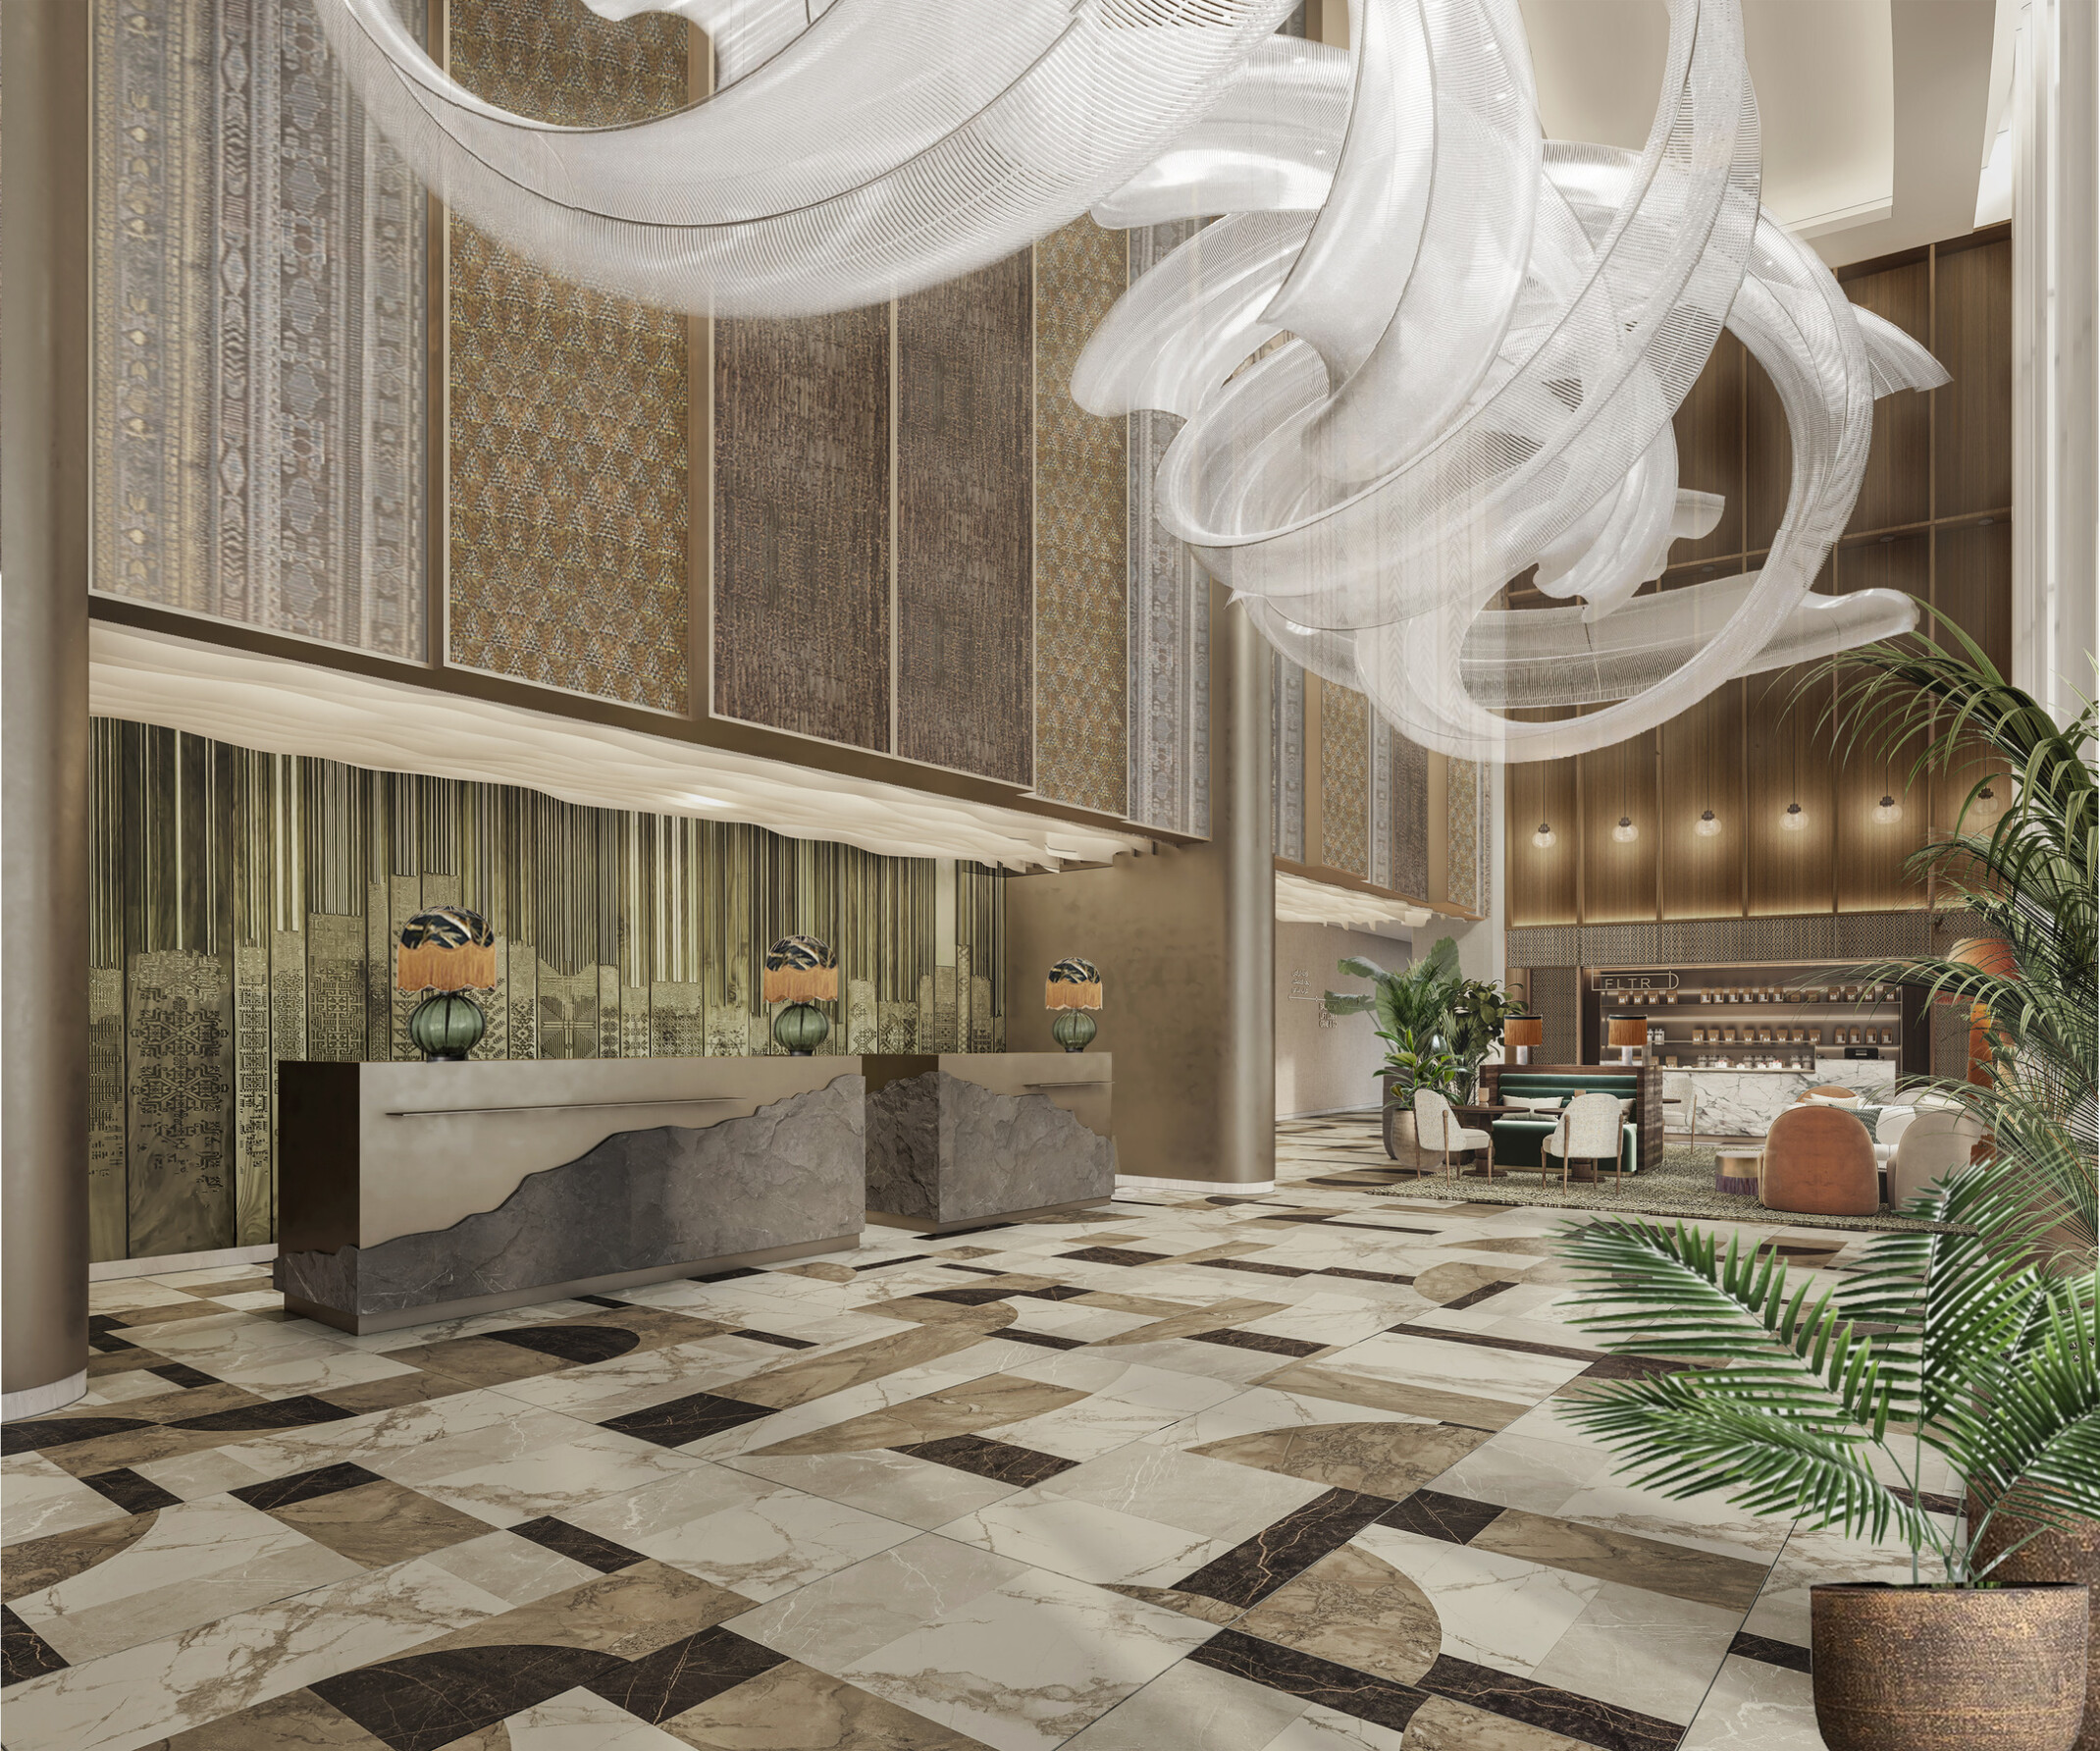 A beautifully designed hotel lobby with elegant furnishings and a welcoming atmosphere. A centerpiece light fixture cascading down from the ceiling, green live plants decorate the lobby.